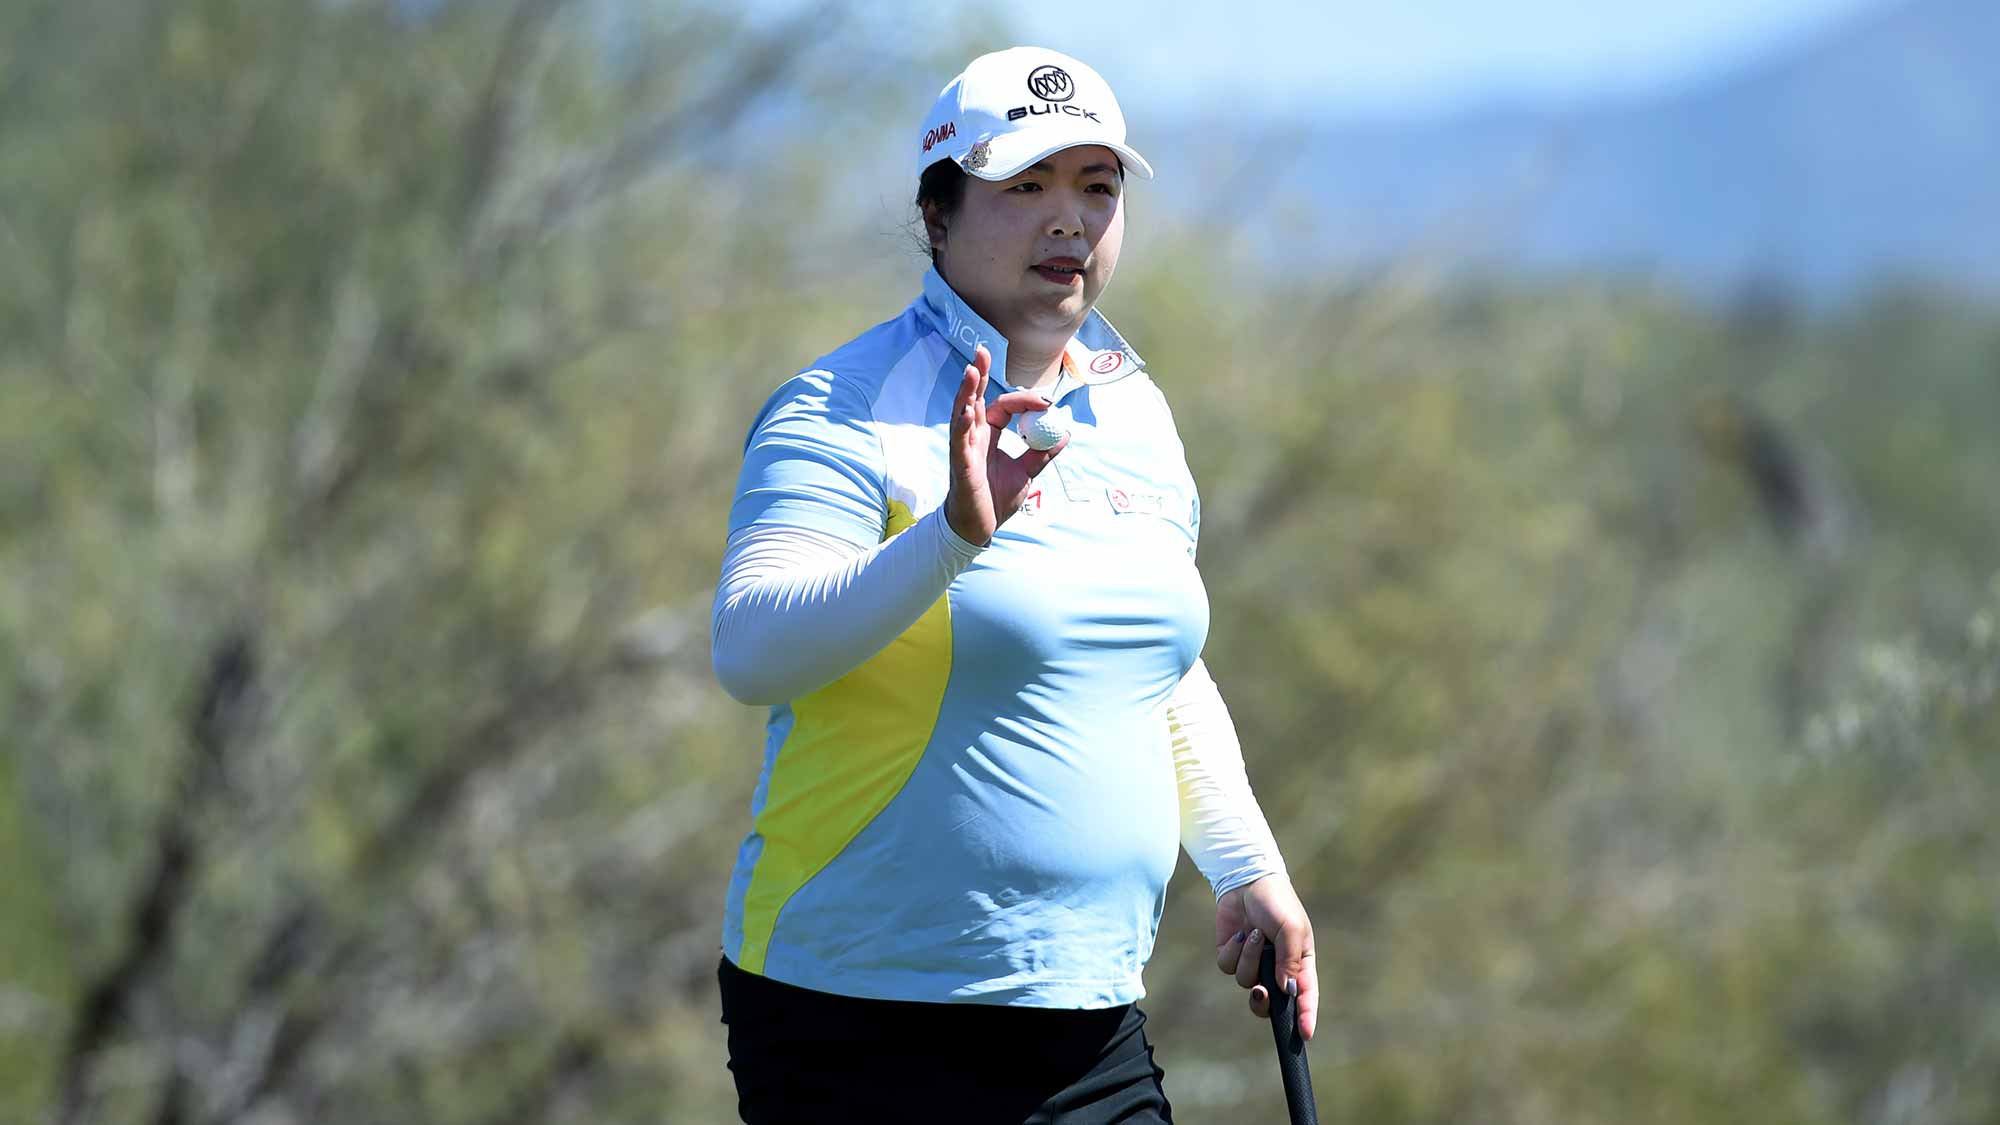 Shanshan Feng of China acknowledges the gallery after sinking a putt on the 16th hole during the third round of the Bank Of Hope Founders Cup at the Wildfire Golf Club on March 23, 2019 in Phoenix, Arizona